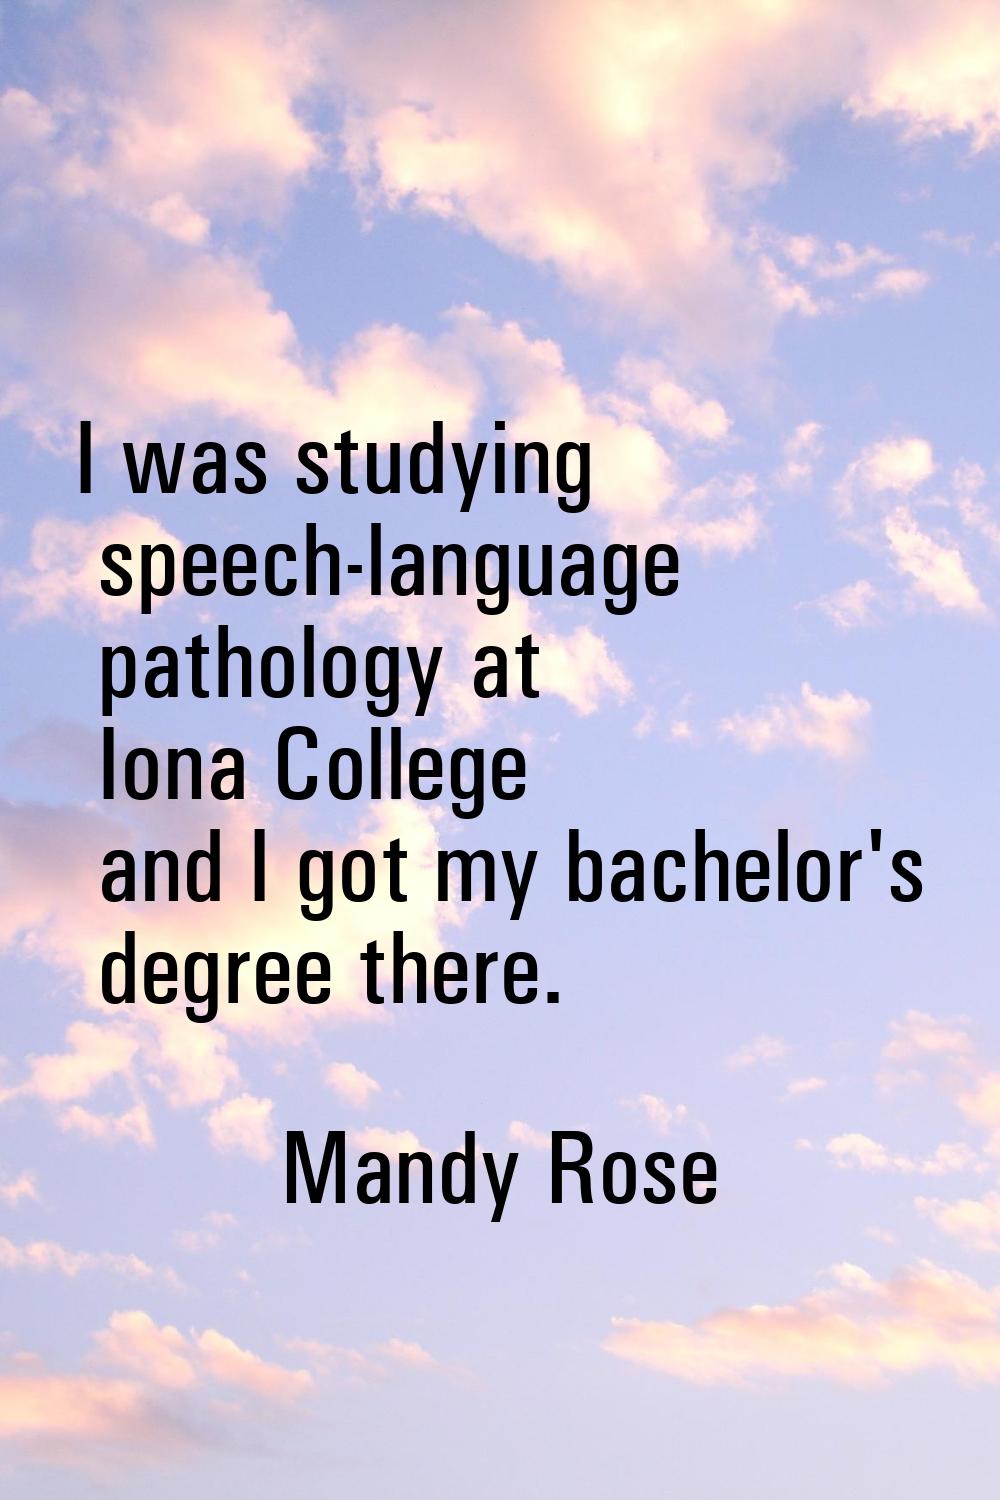 I was studying speech-language pathology at Iona College and I got my bachelor's degree there.